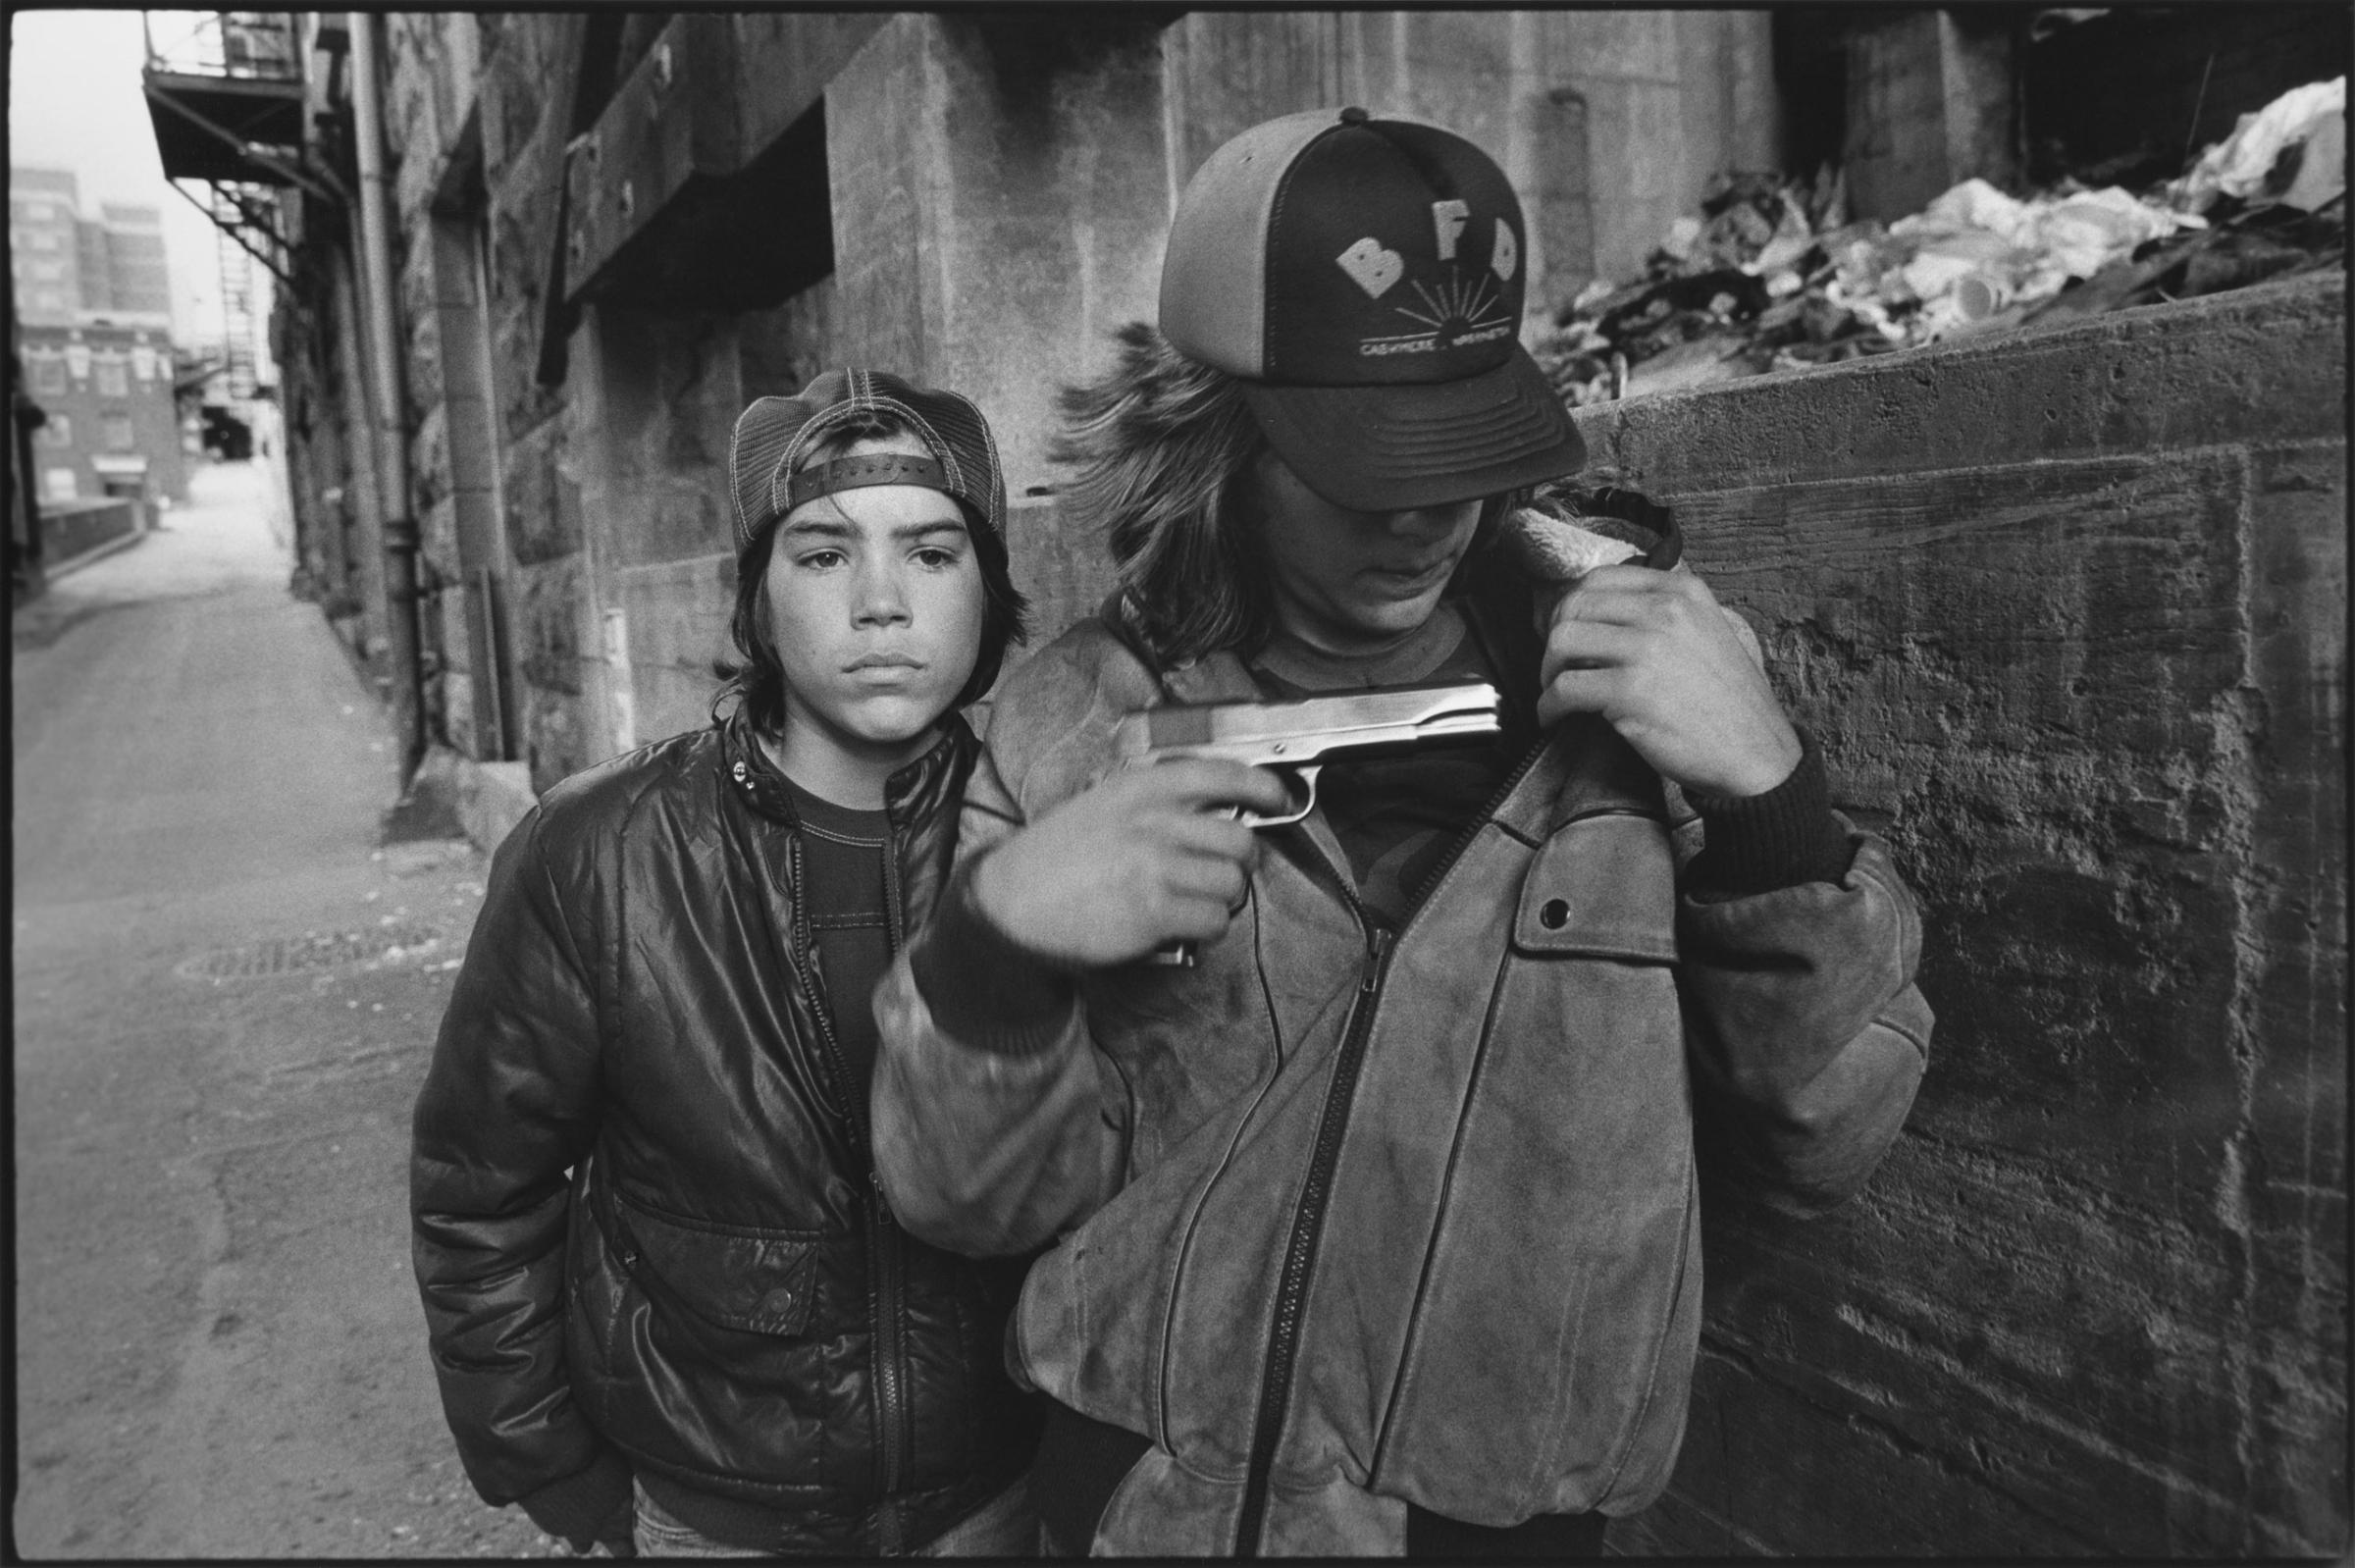 "Rat" and Mike with a gun, Seattle, Washington, 1983